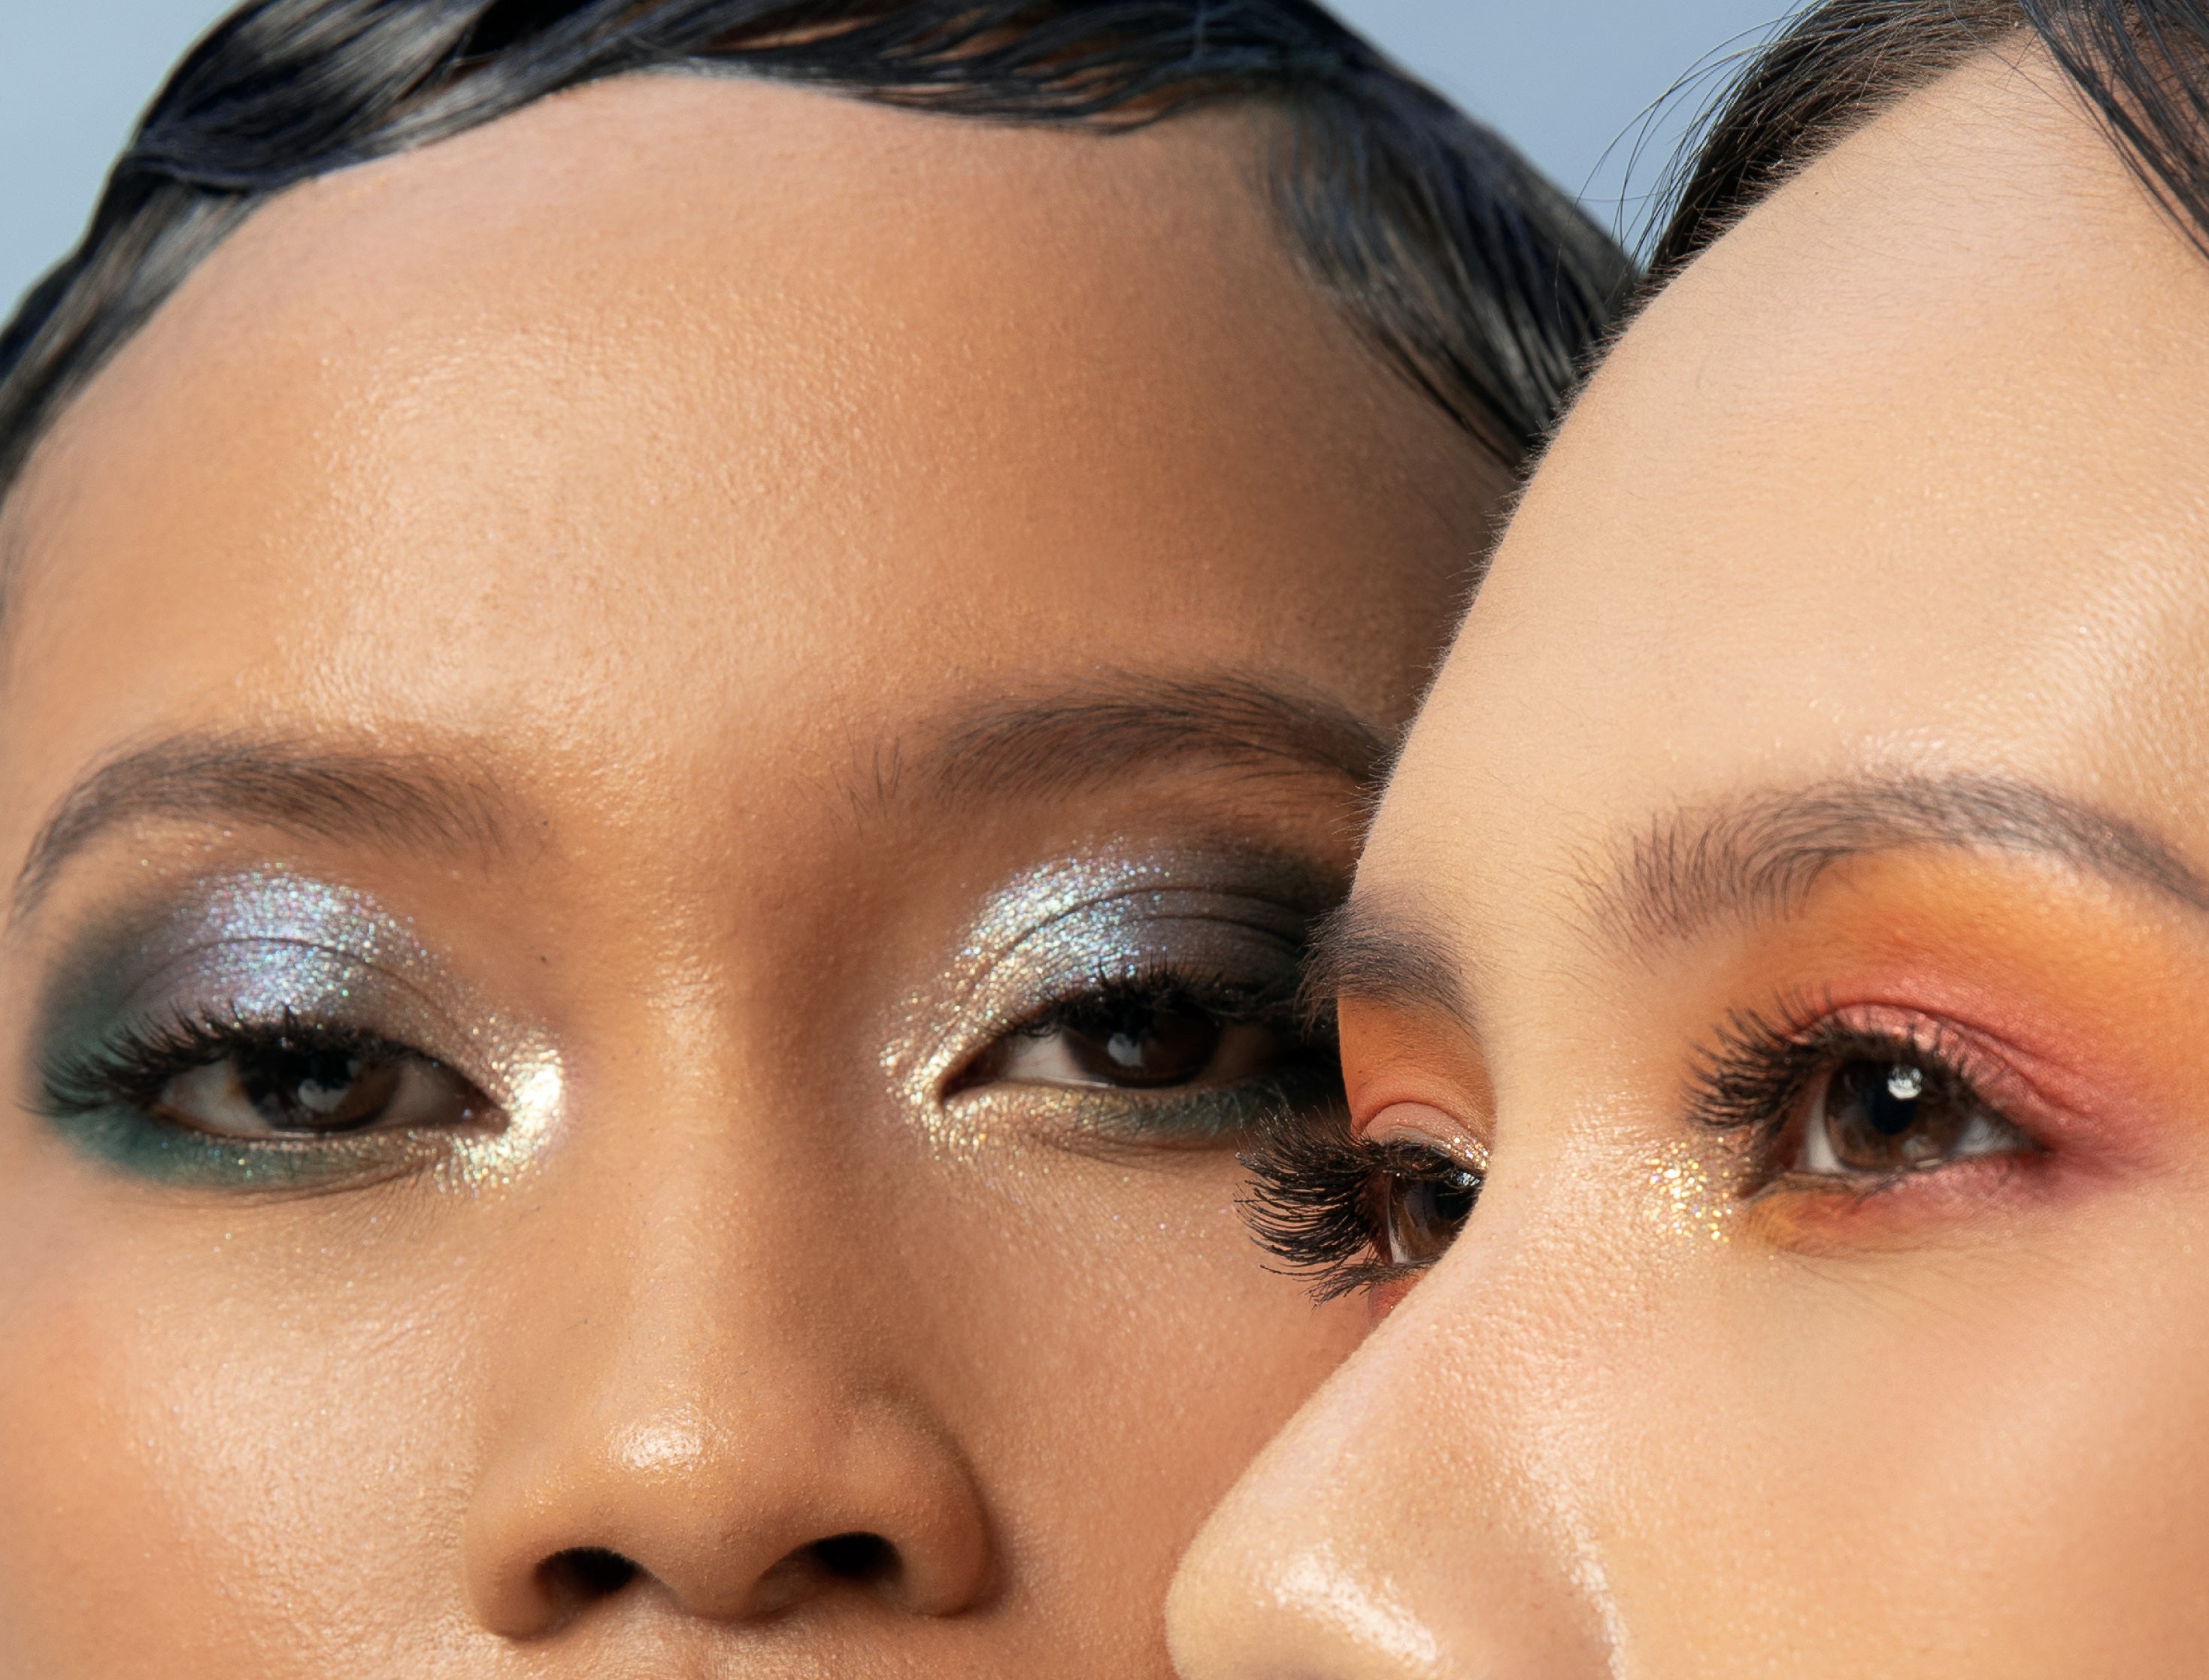 NOW TALKING | HOW TO BE ANYTHING WITH EYESHADOW PALETTE & LASH BASH